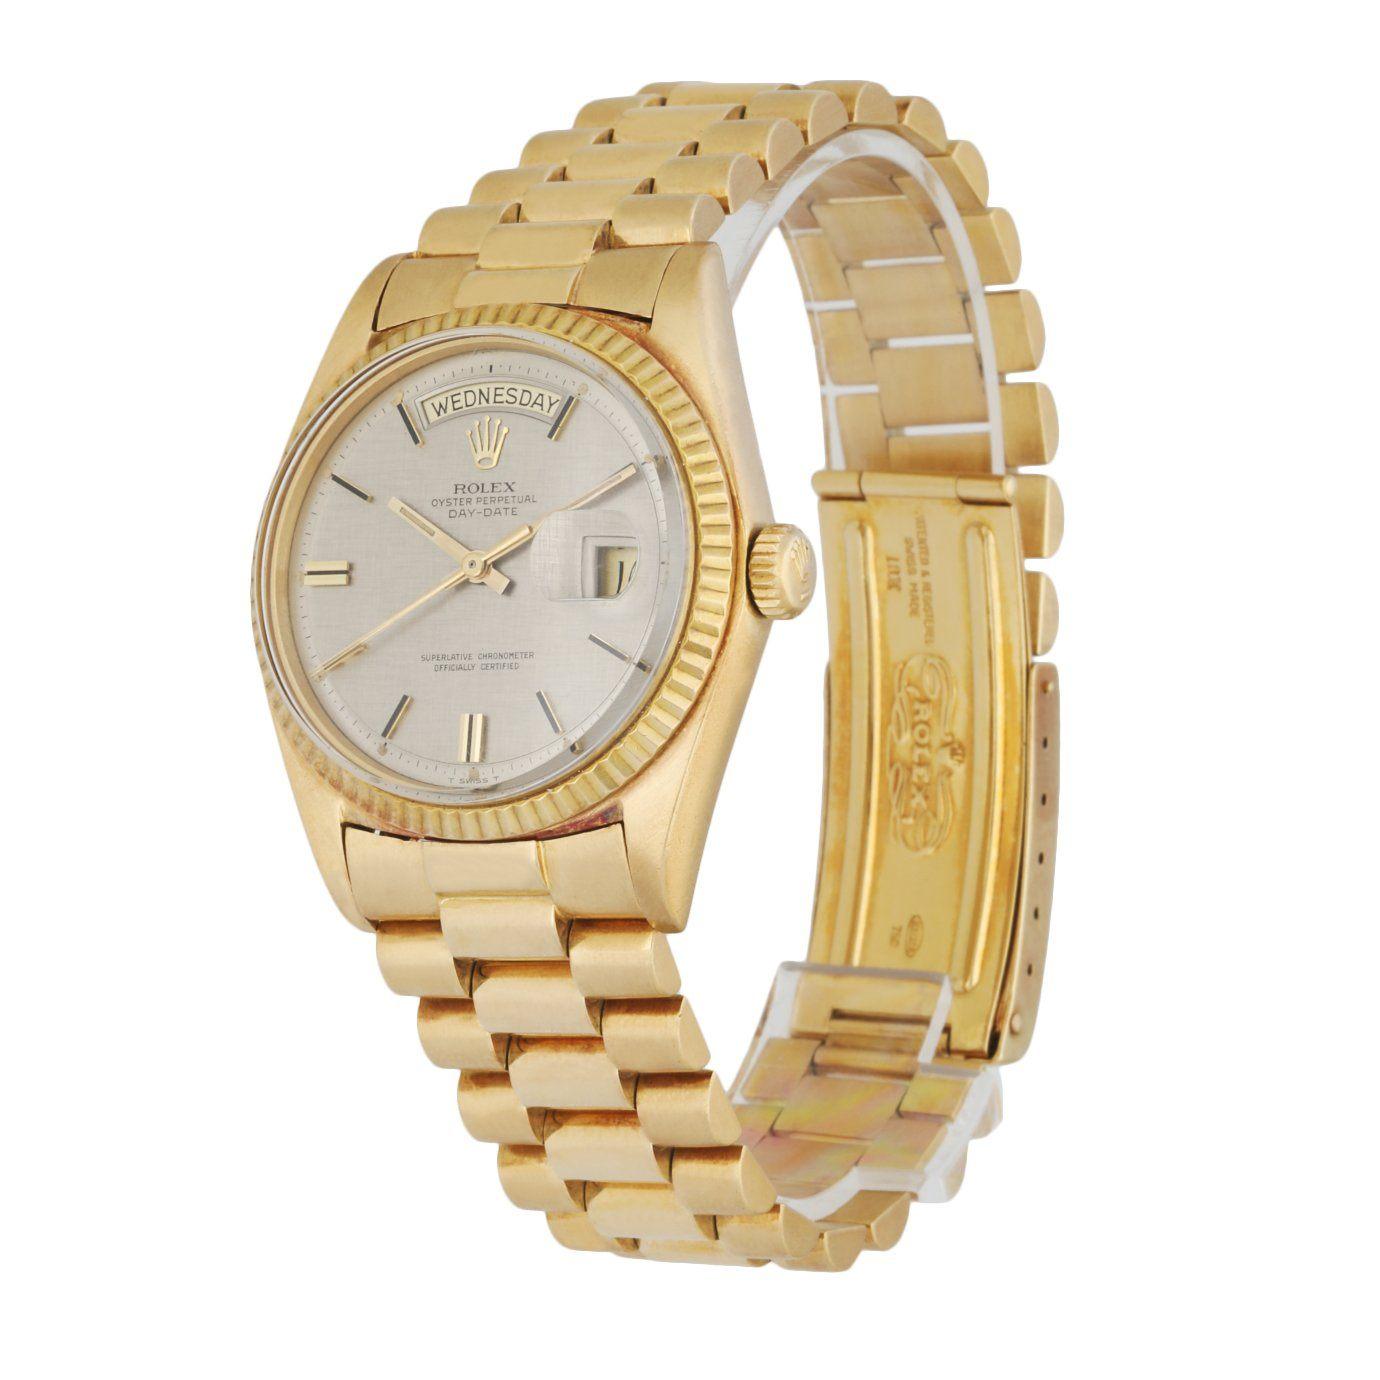 Rolex Day-Date 1803 men's watch. 36mm 18k Yellow gold case with 18K yellow gold fluted bezel.Â Silver linen dial with gold luminous hands andÂ index hour markers. Minute markers on the outer dial. Date display at the 3 o'clock position and day